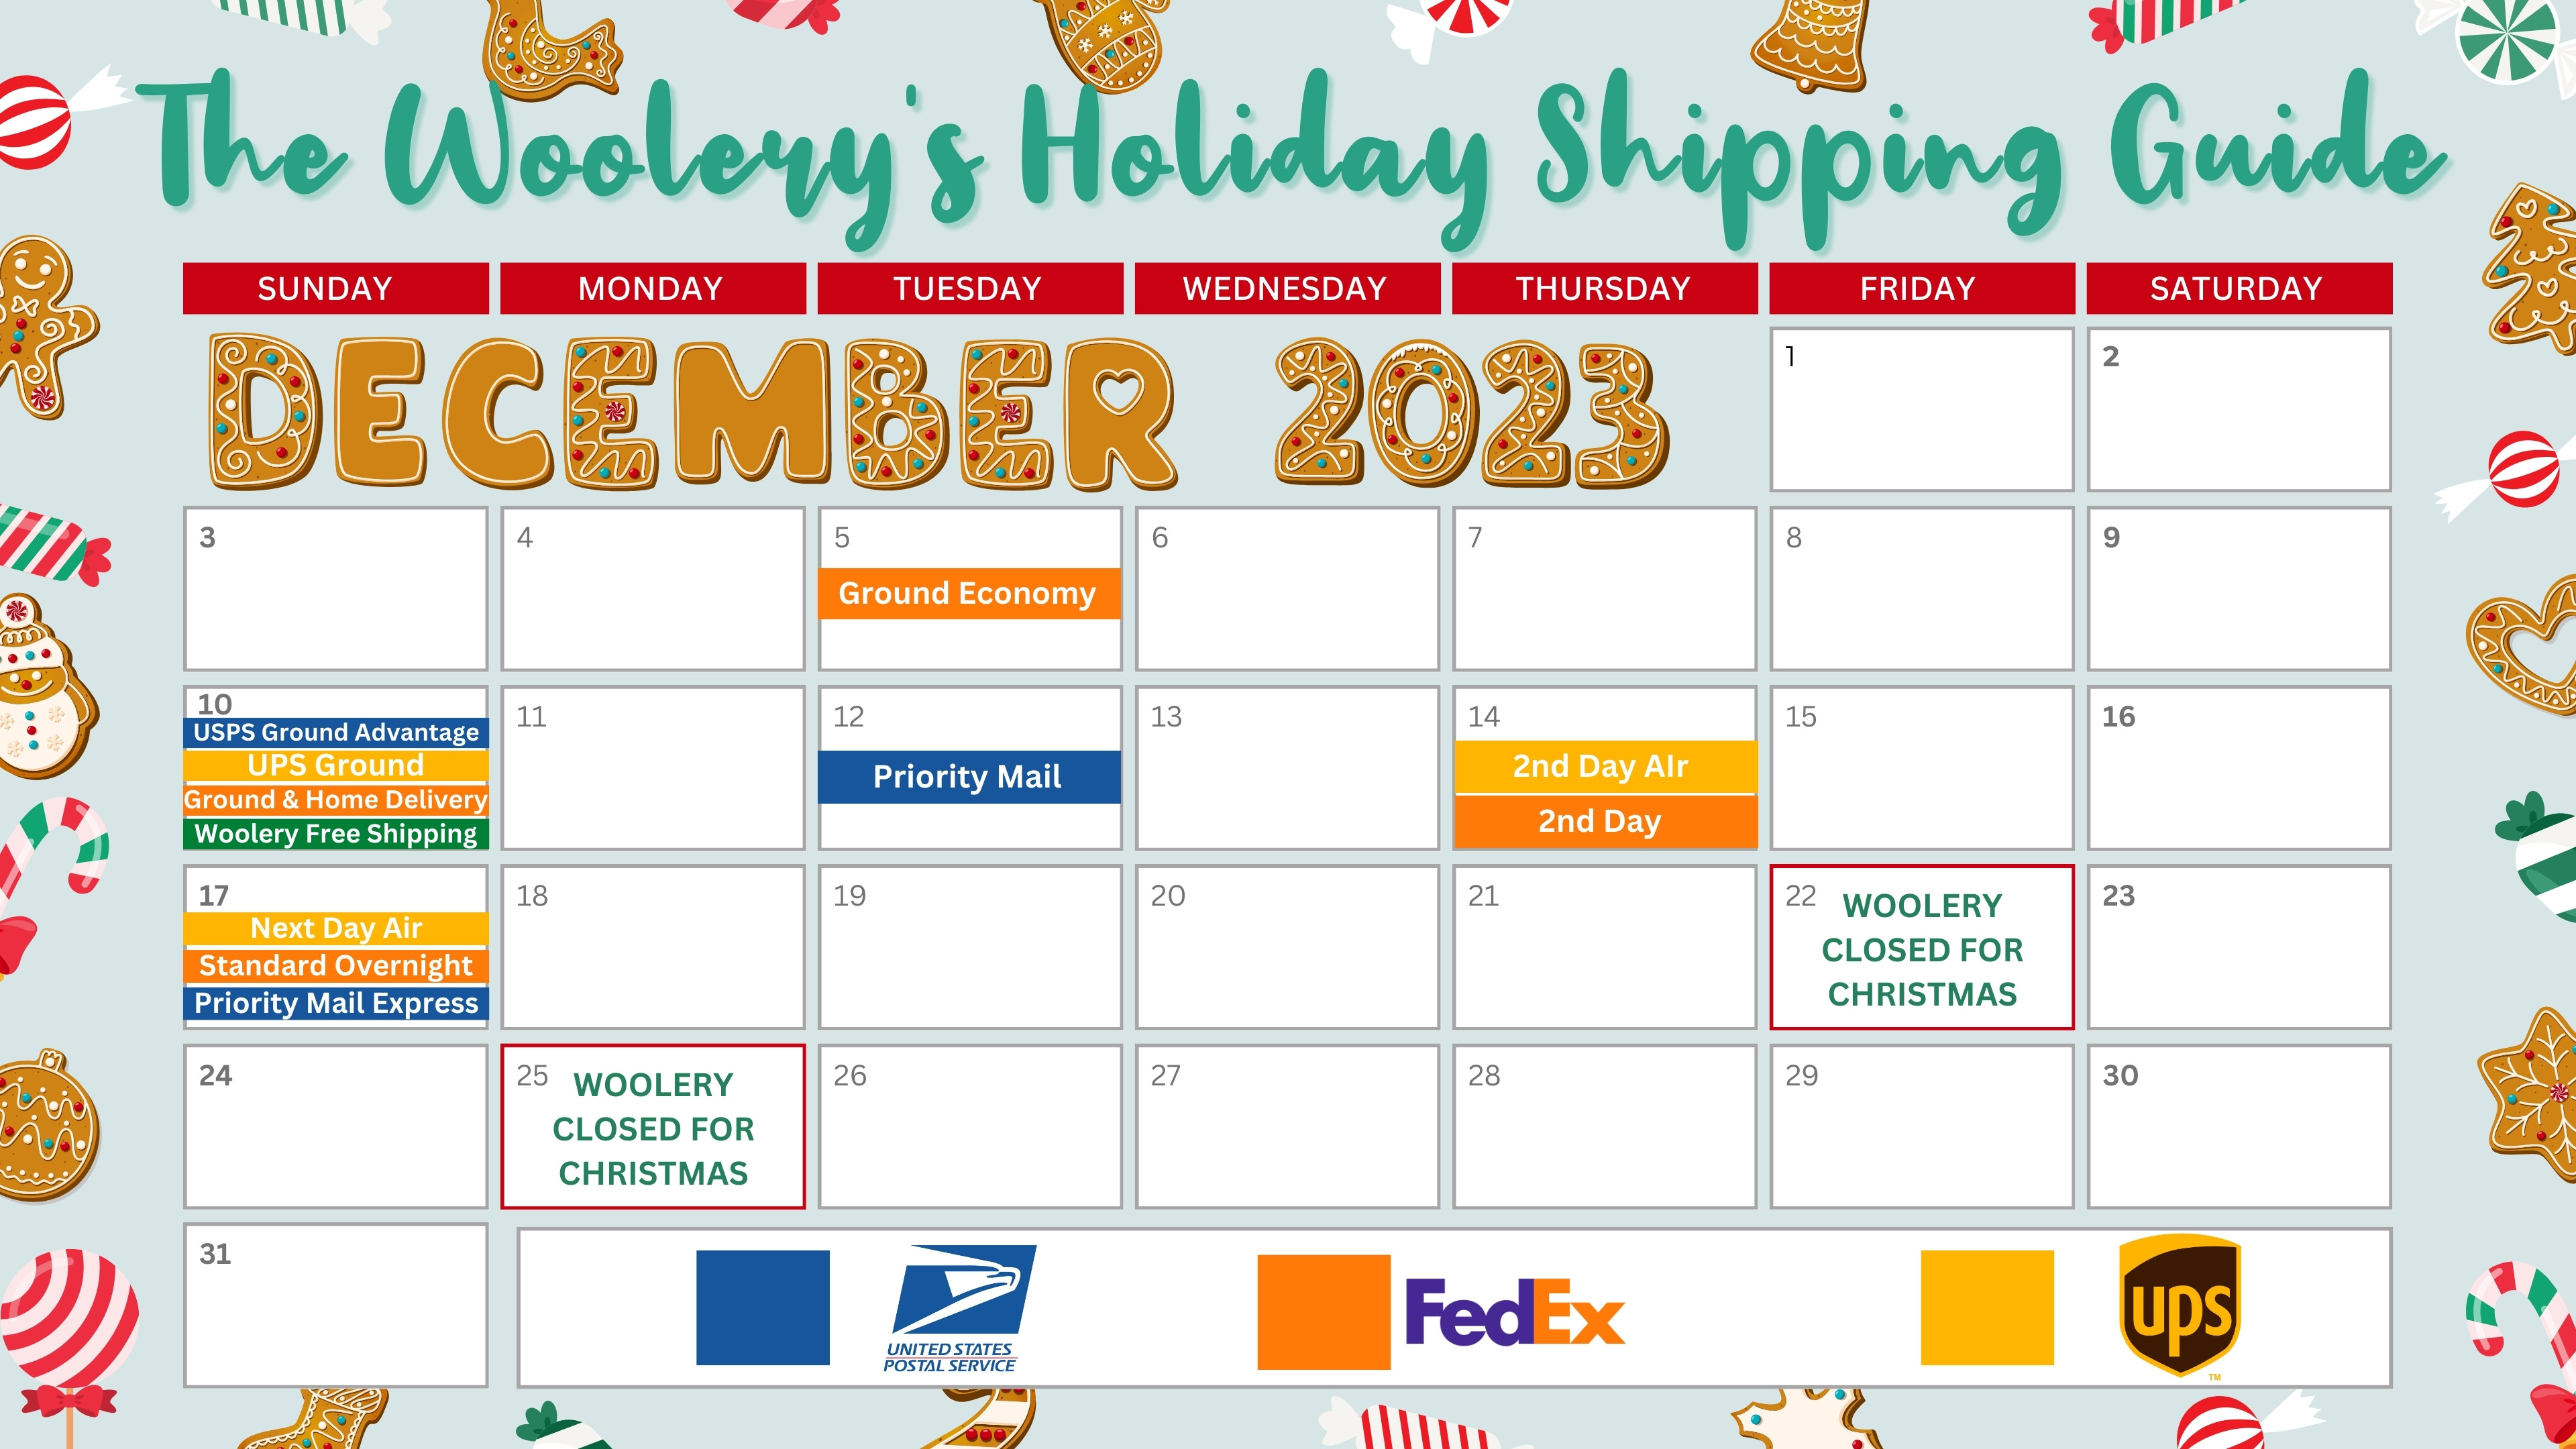 HOLIDAY SHIPPING GUIDE  - UltraPoi